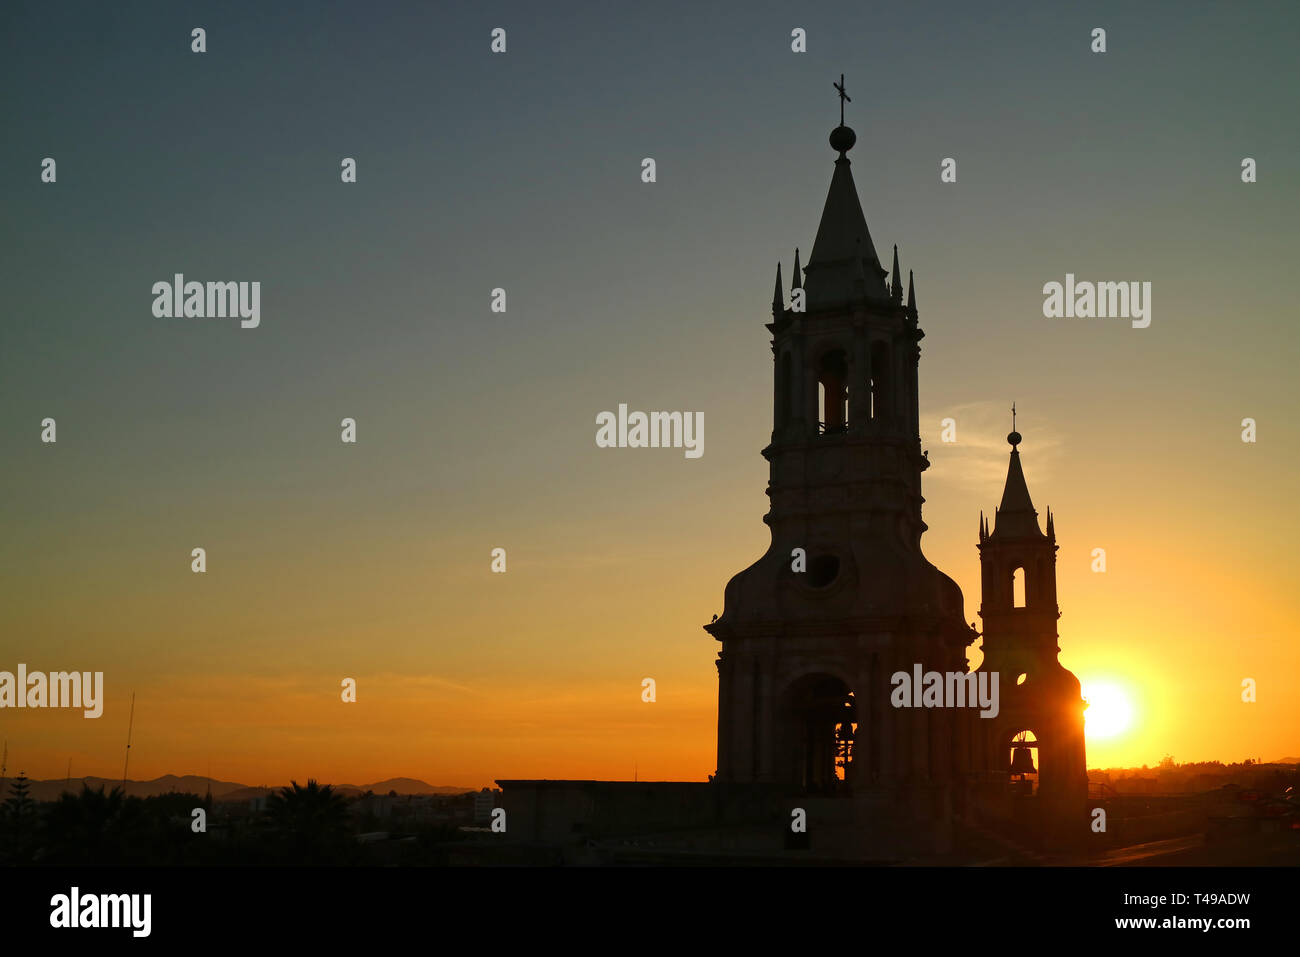 Silhouette of the Iconic Bell Tower of Basilica Cathedral of Arequipa against the Setting Sun, Peru Stock Photo